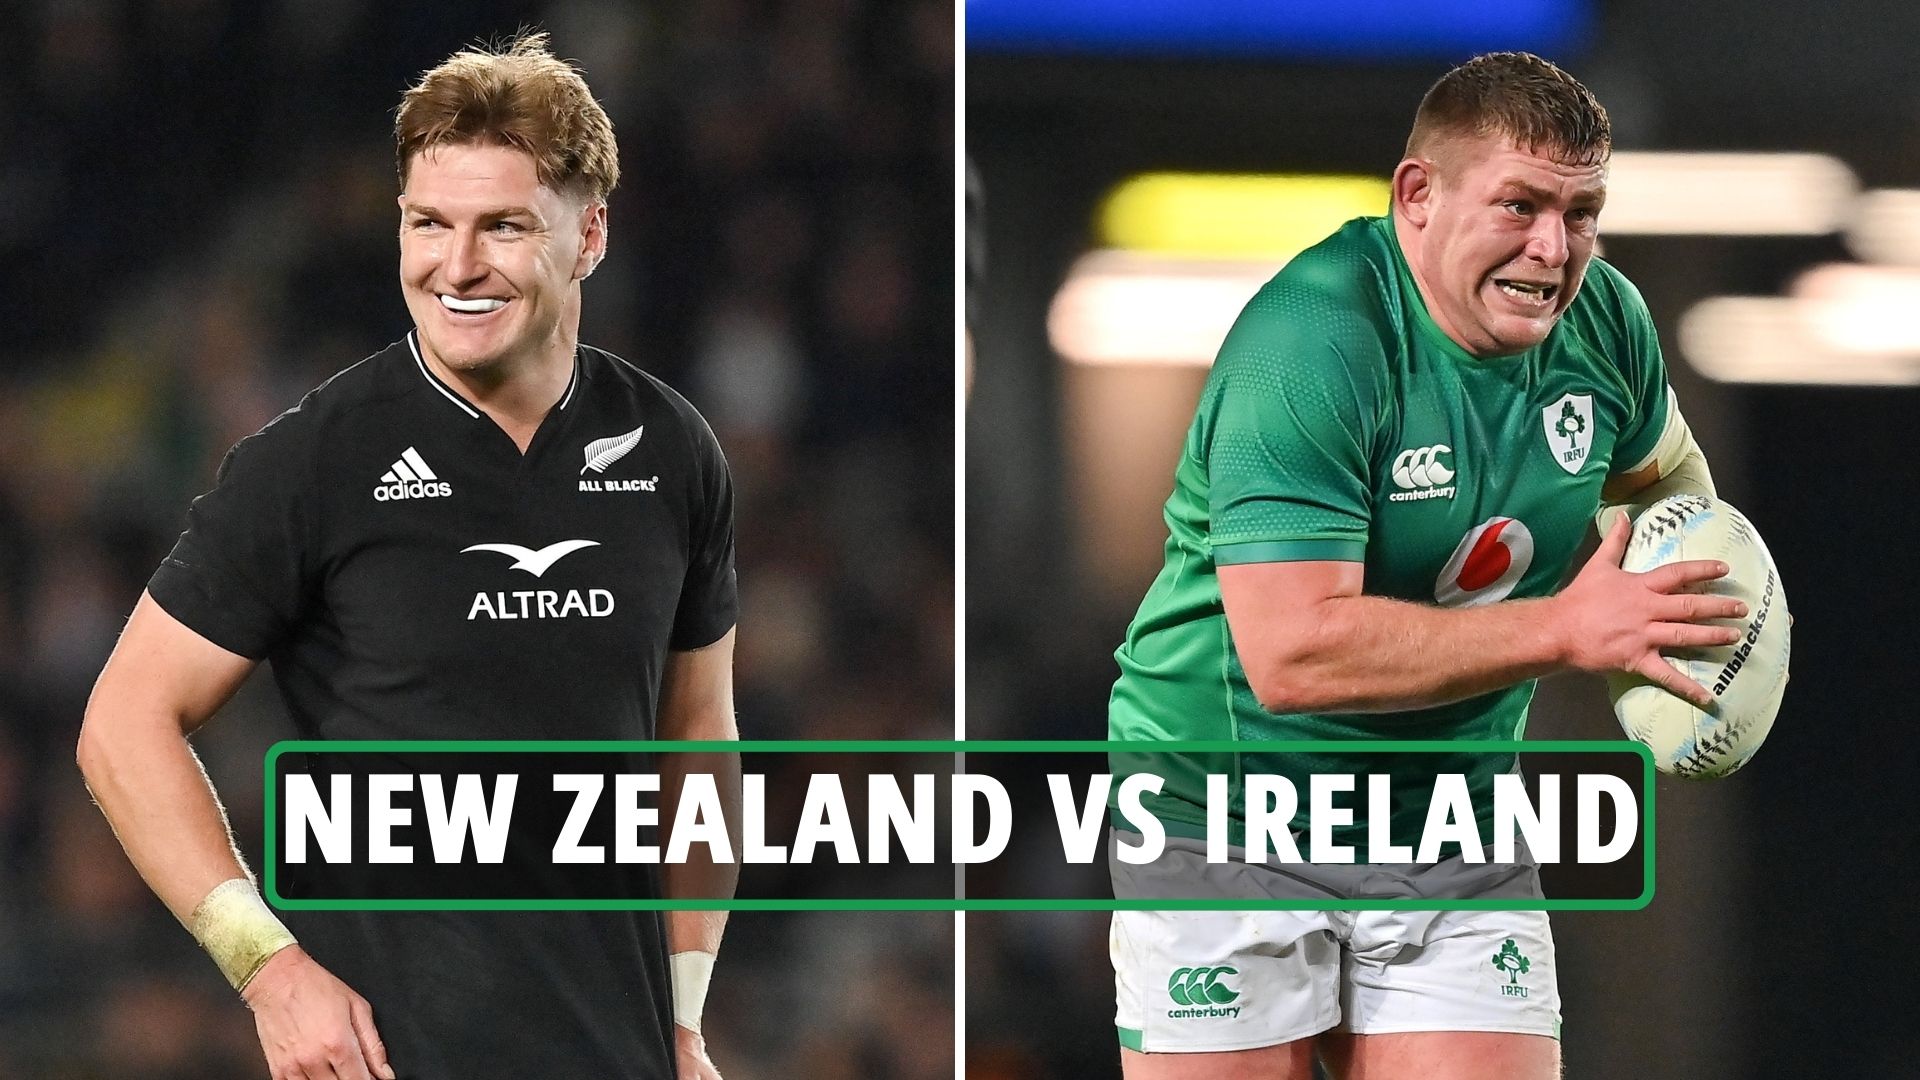 Rugby New Zealand vs Ireland Start Time, TV Channel, Live Stream, Team News for 2nd Test